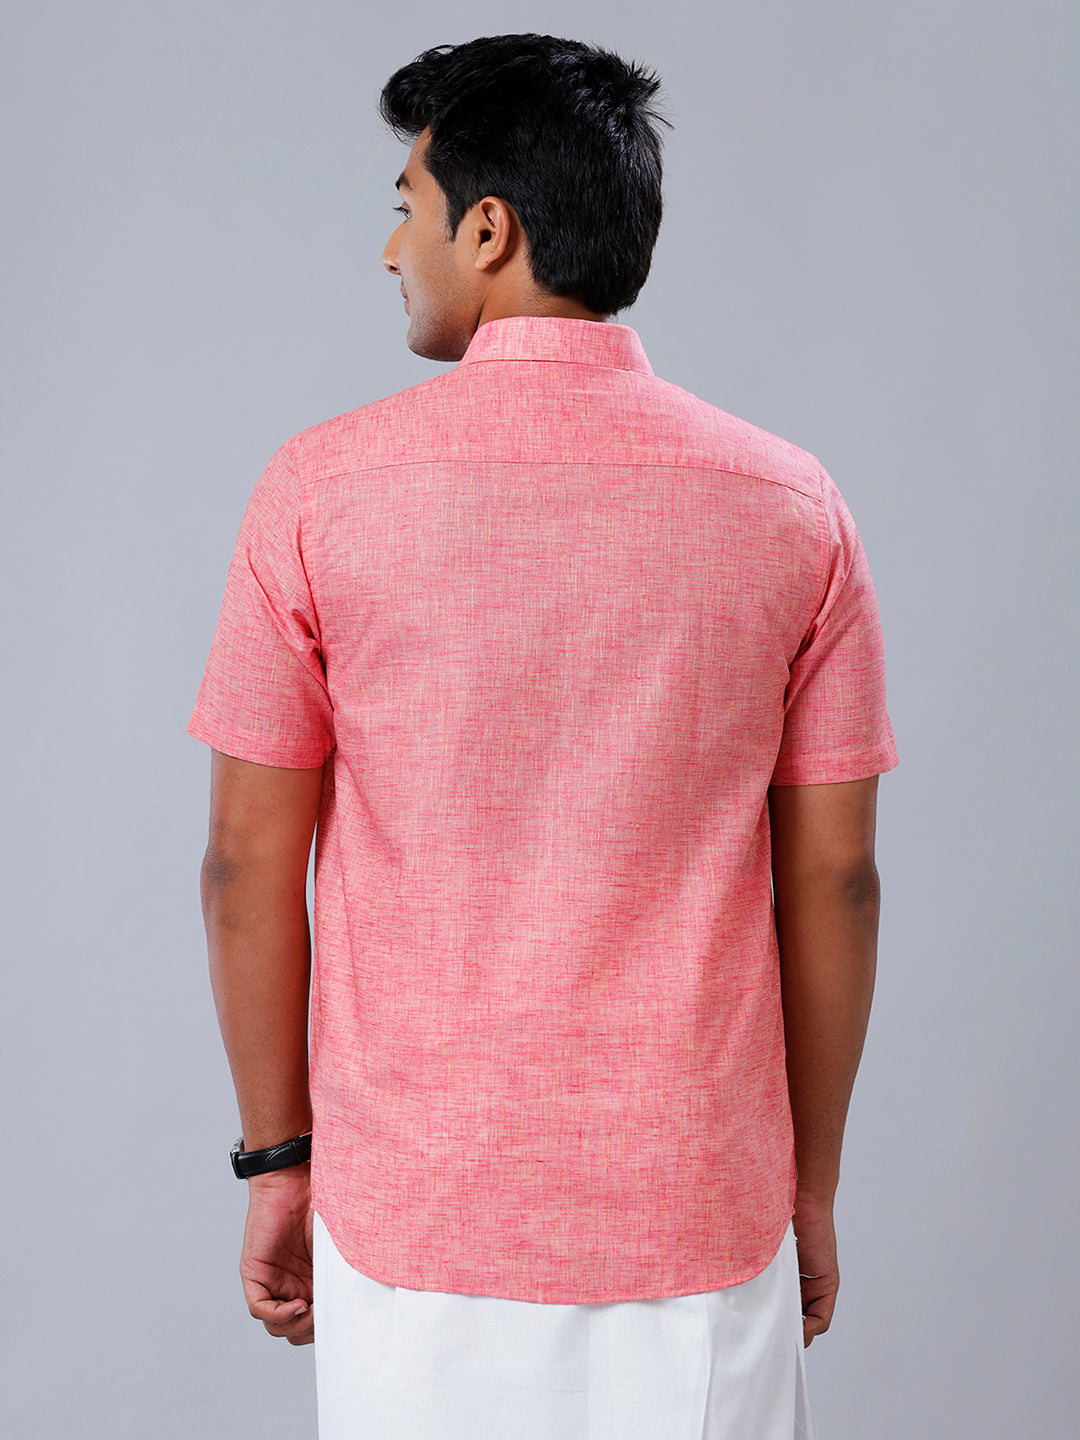 Mens Formal Shirt Half Sleeves Pink T39 TO1-Back view